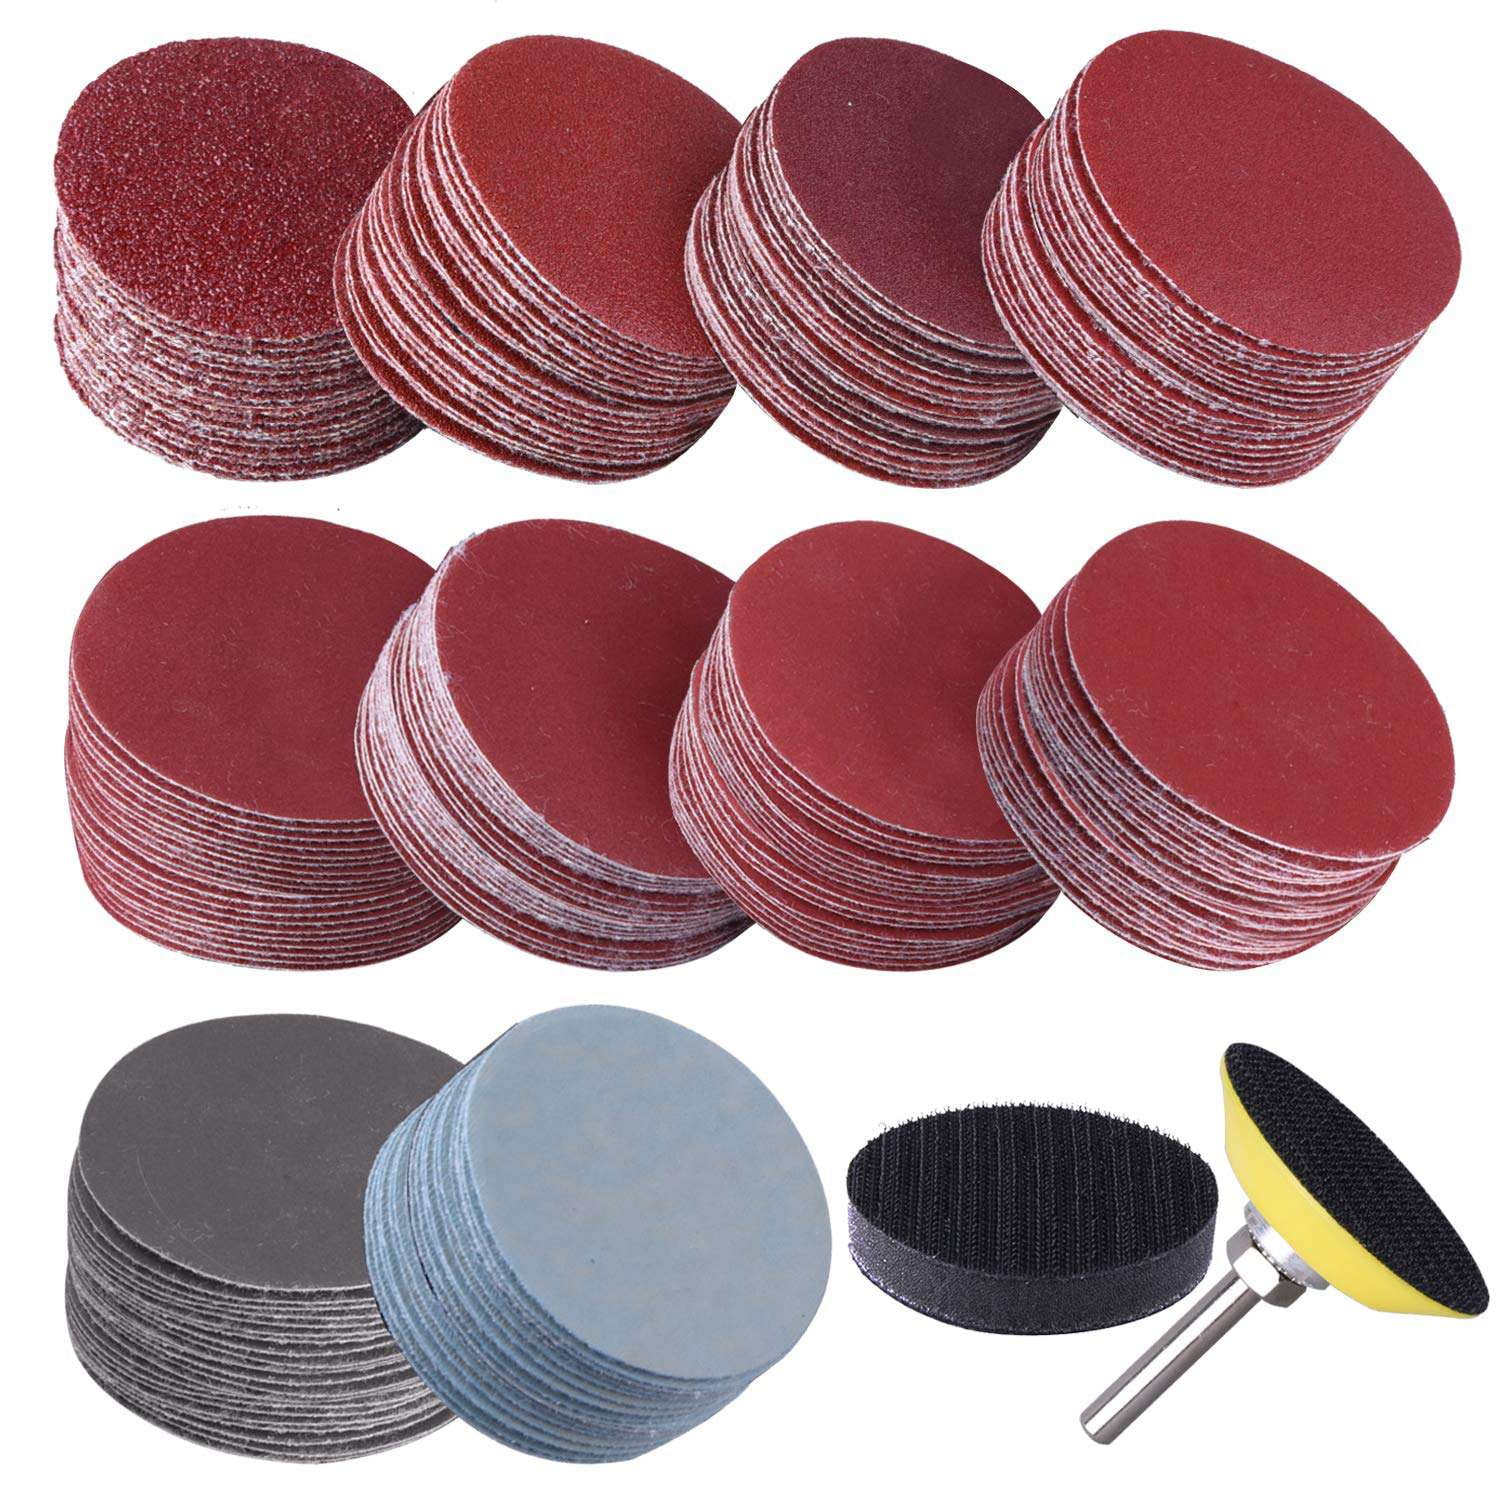 200PCS Abrasive Sanding Disc Pad Wet Dry Sander Sheets with Baking Pad Kit 3inch 